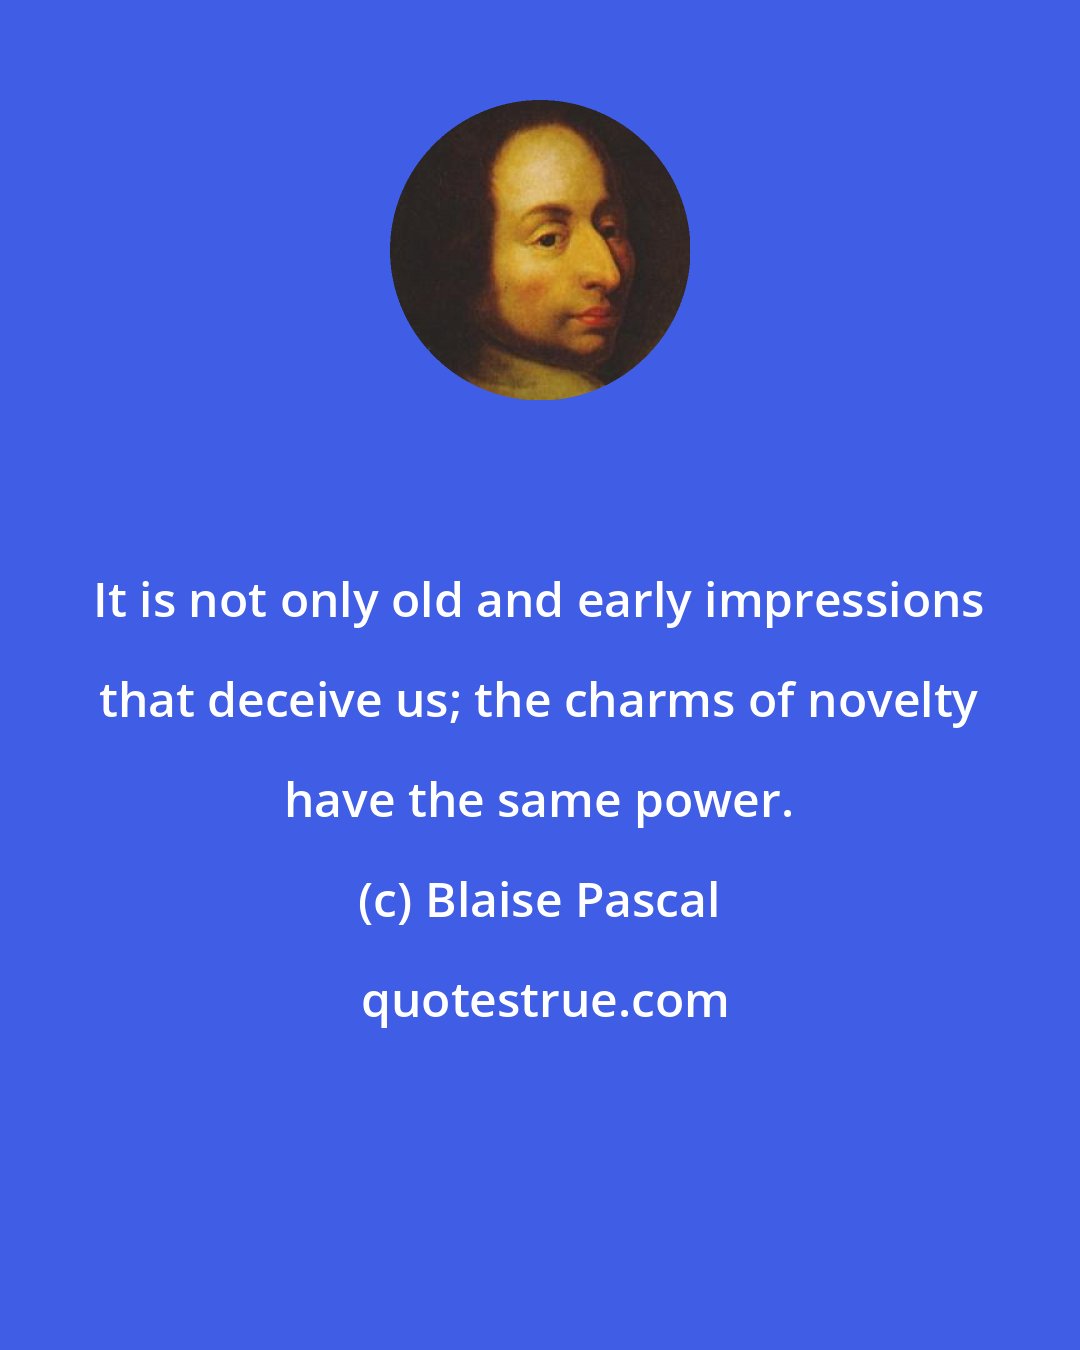 Blaise Pascal: It is not only old and early impressions that deceive us; the charms of novelty have the same power.